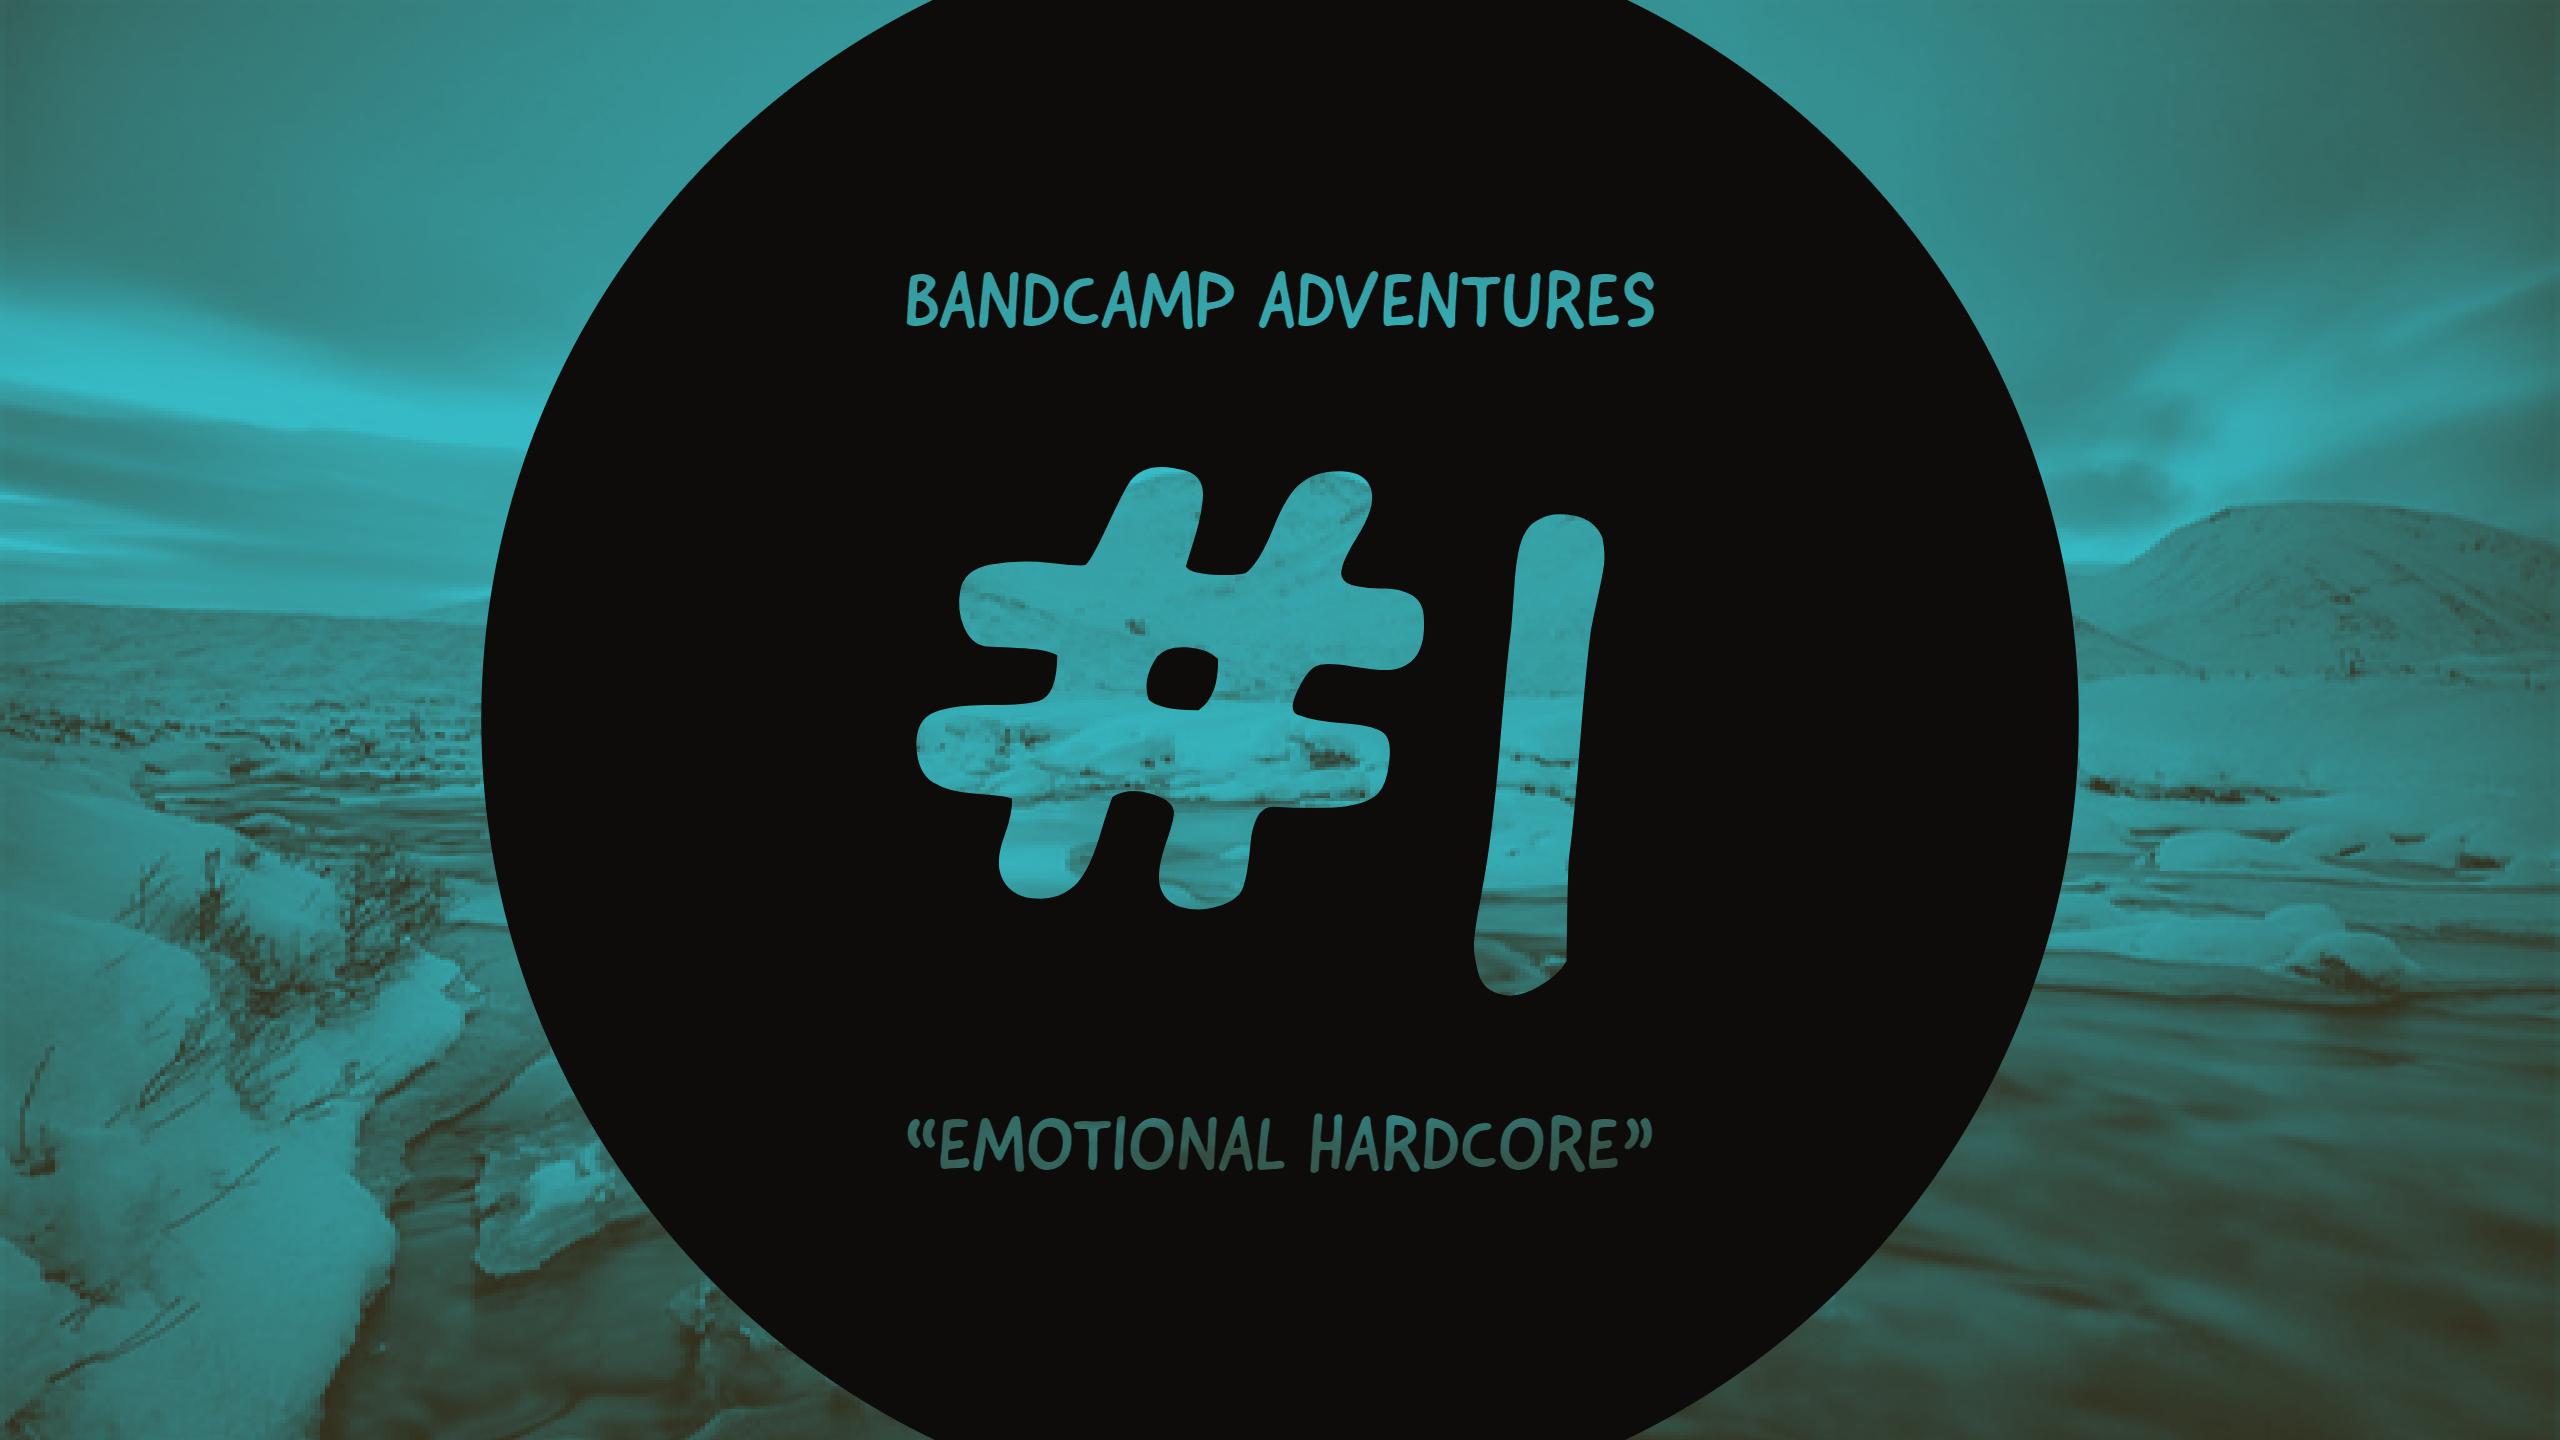 Bandcamp Adventures #1: “Emotional Hardcore” (MUST SEE! Monday # 32)